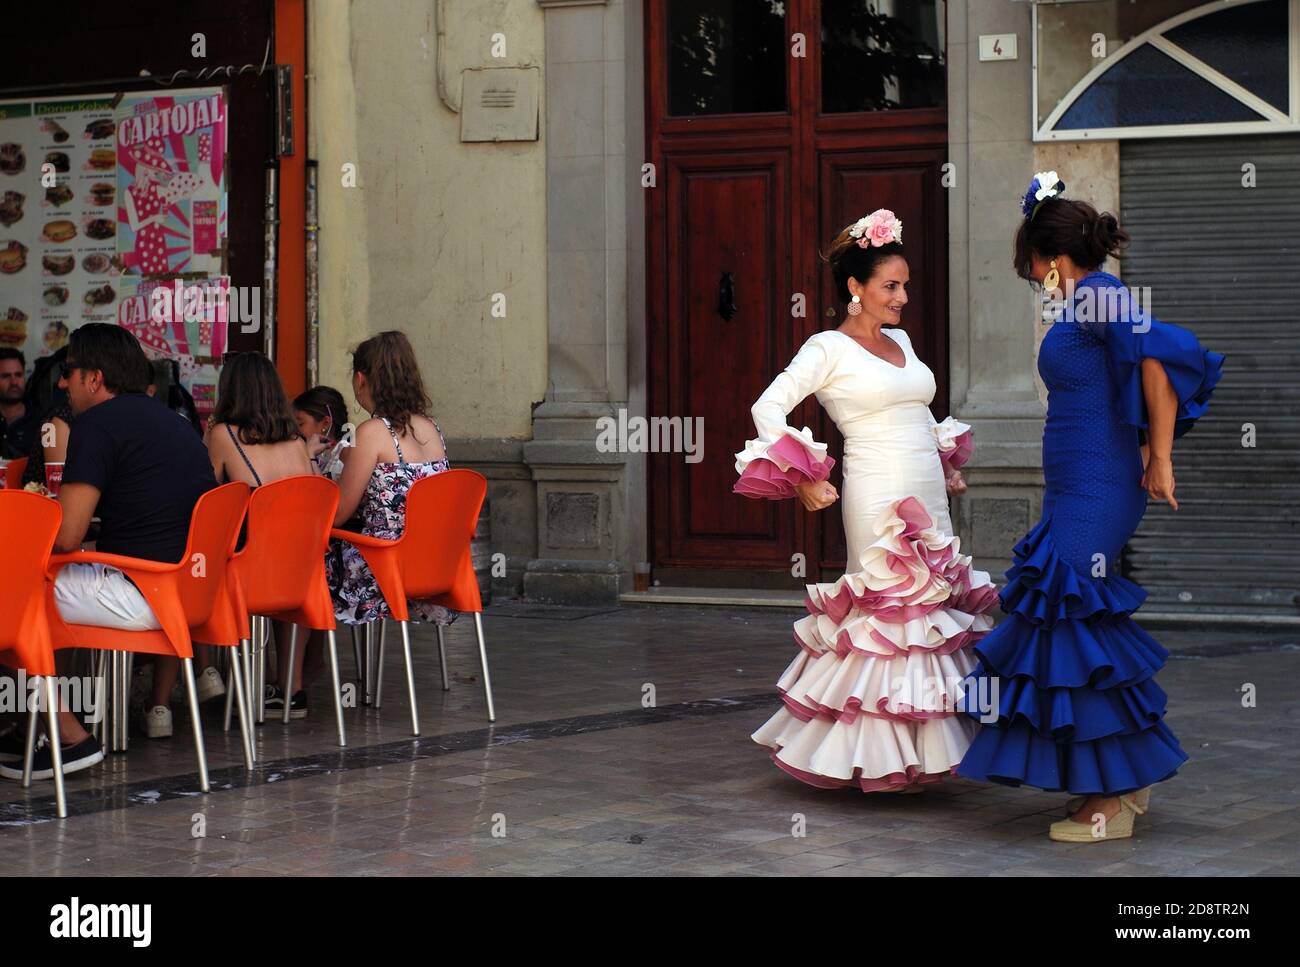 Men and women dance flamenco in the street during a break in a flamenco festival, in Seville, Spain August 16, 2019. Photograph John Voos Stock Photo